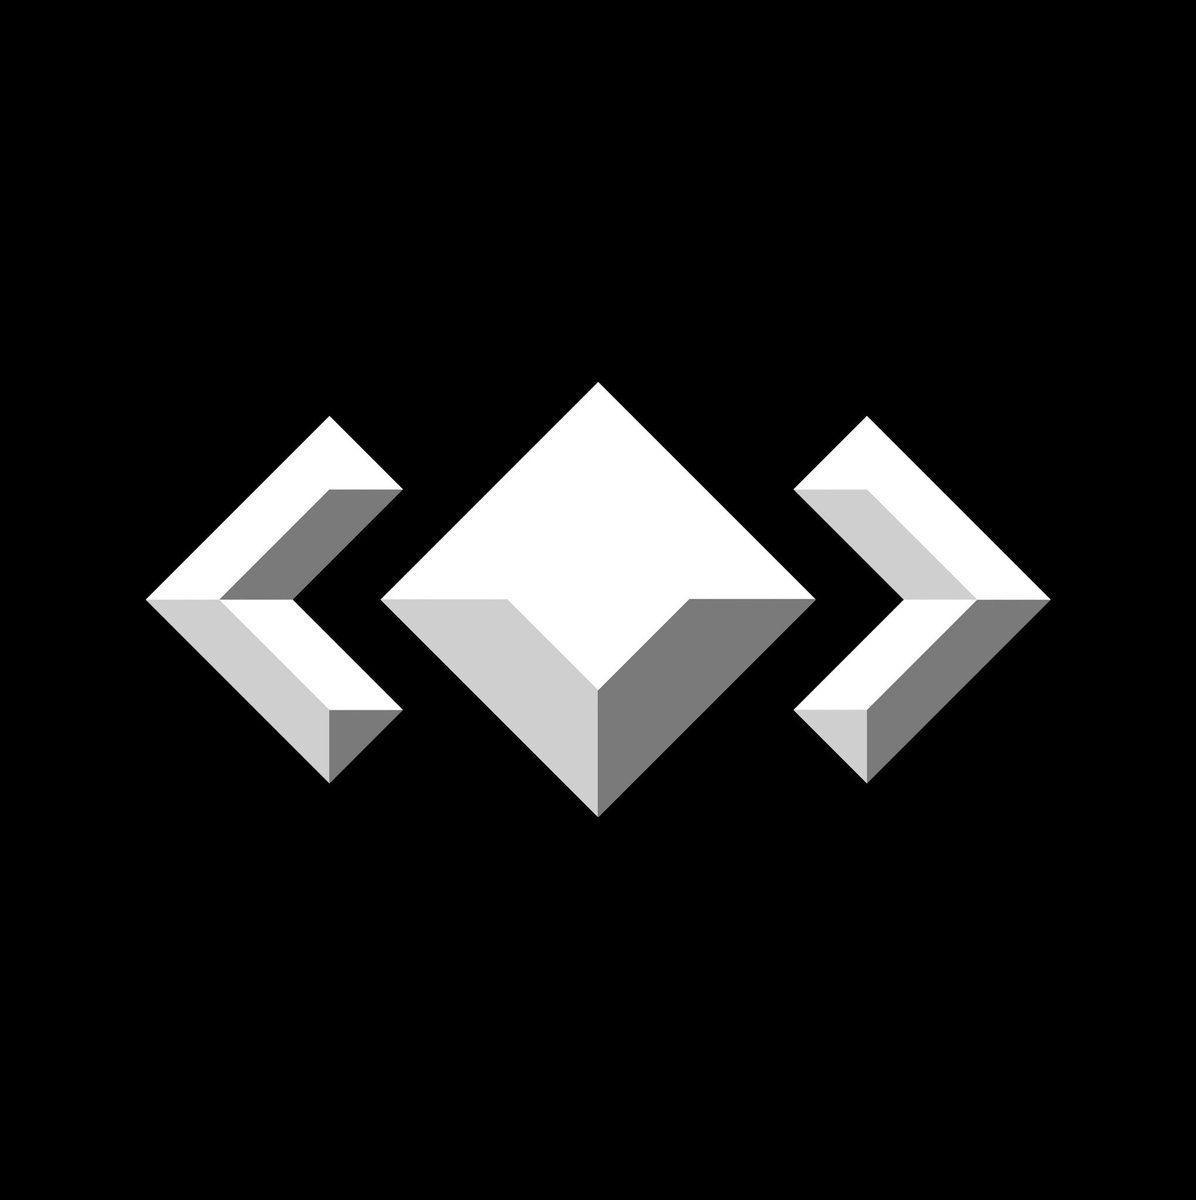 Cool Diamond Logo - Madeon've been seeing so many cool fan arts lately